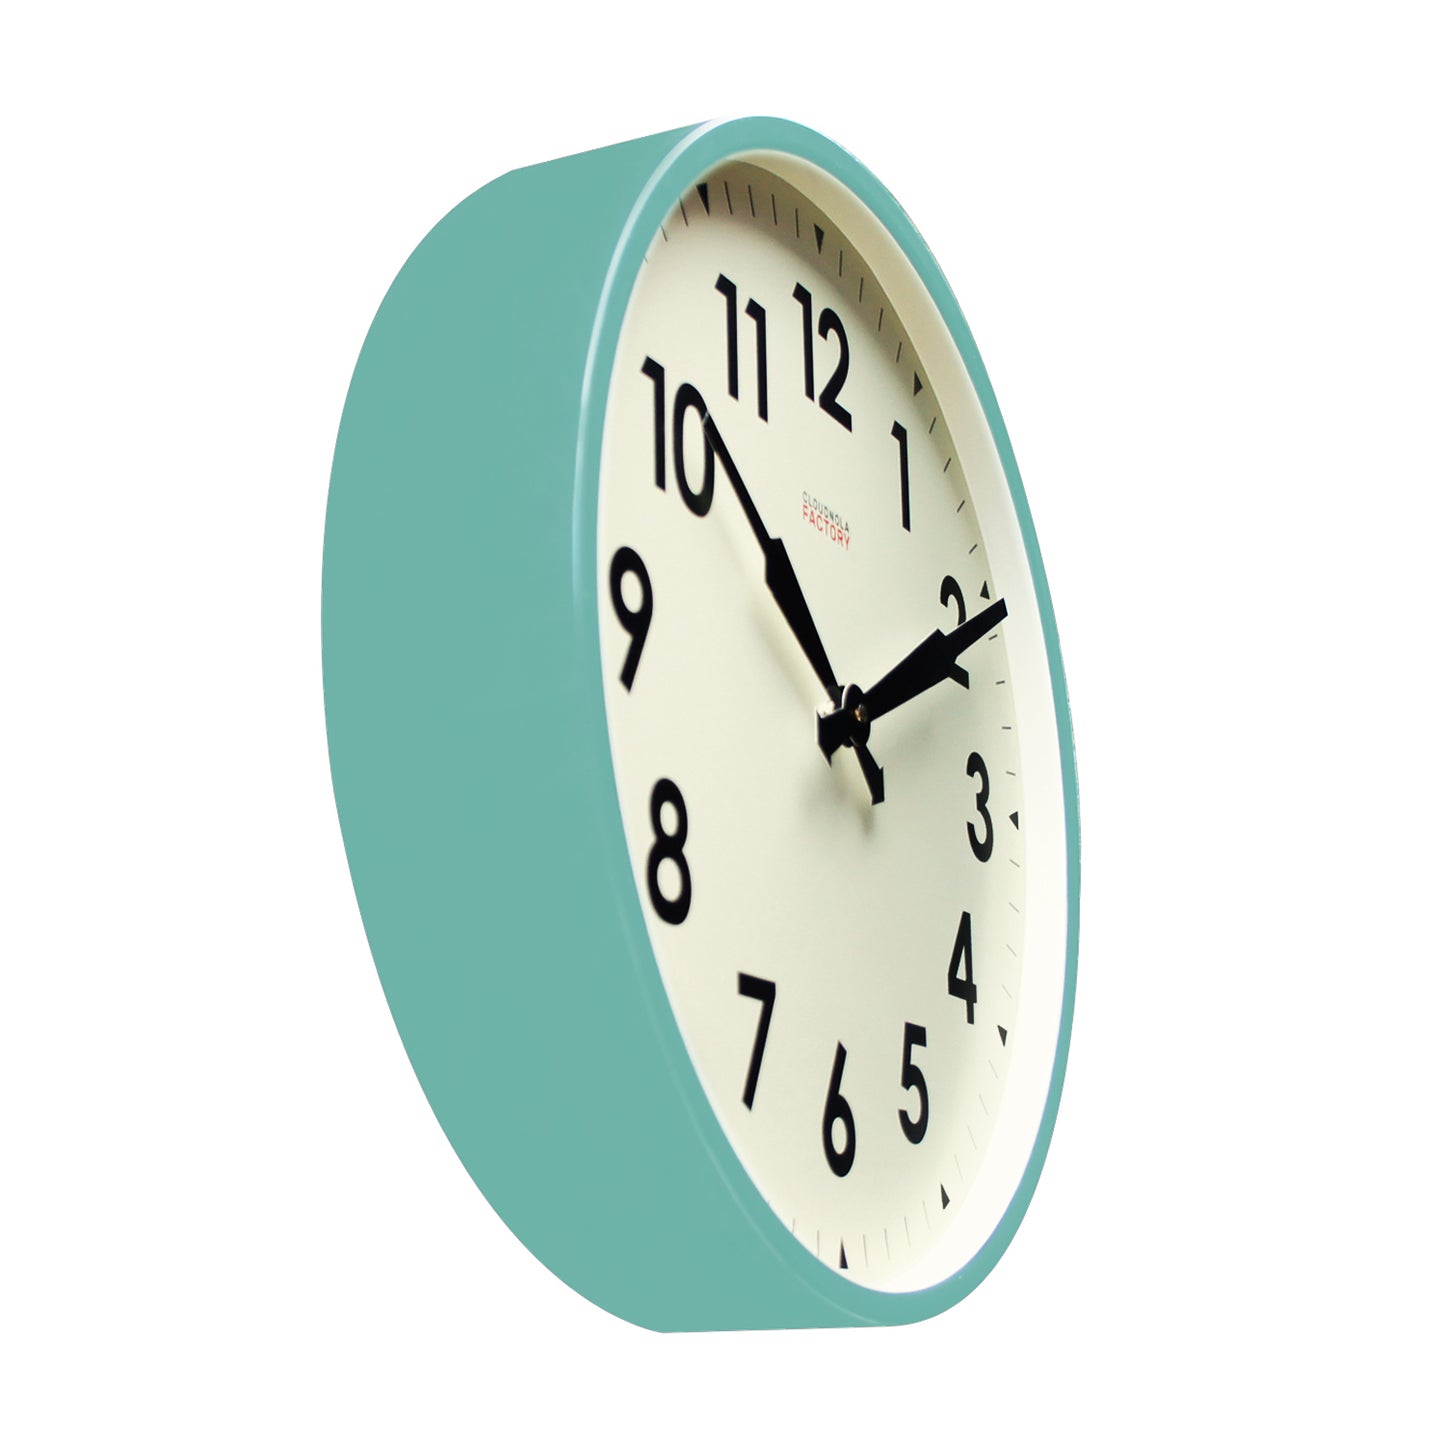 Factory XL Turquoise - Diameter 17.7 - Wall Clock - Silent - Steel Case